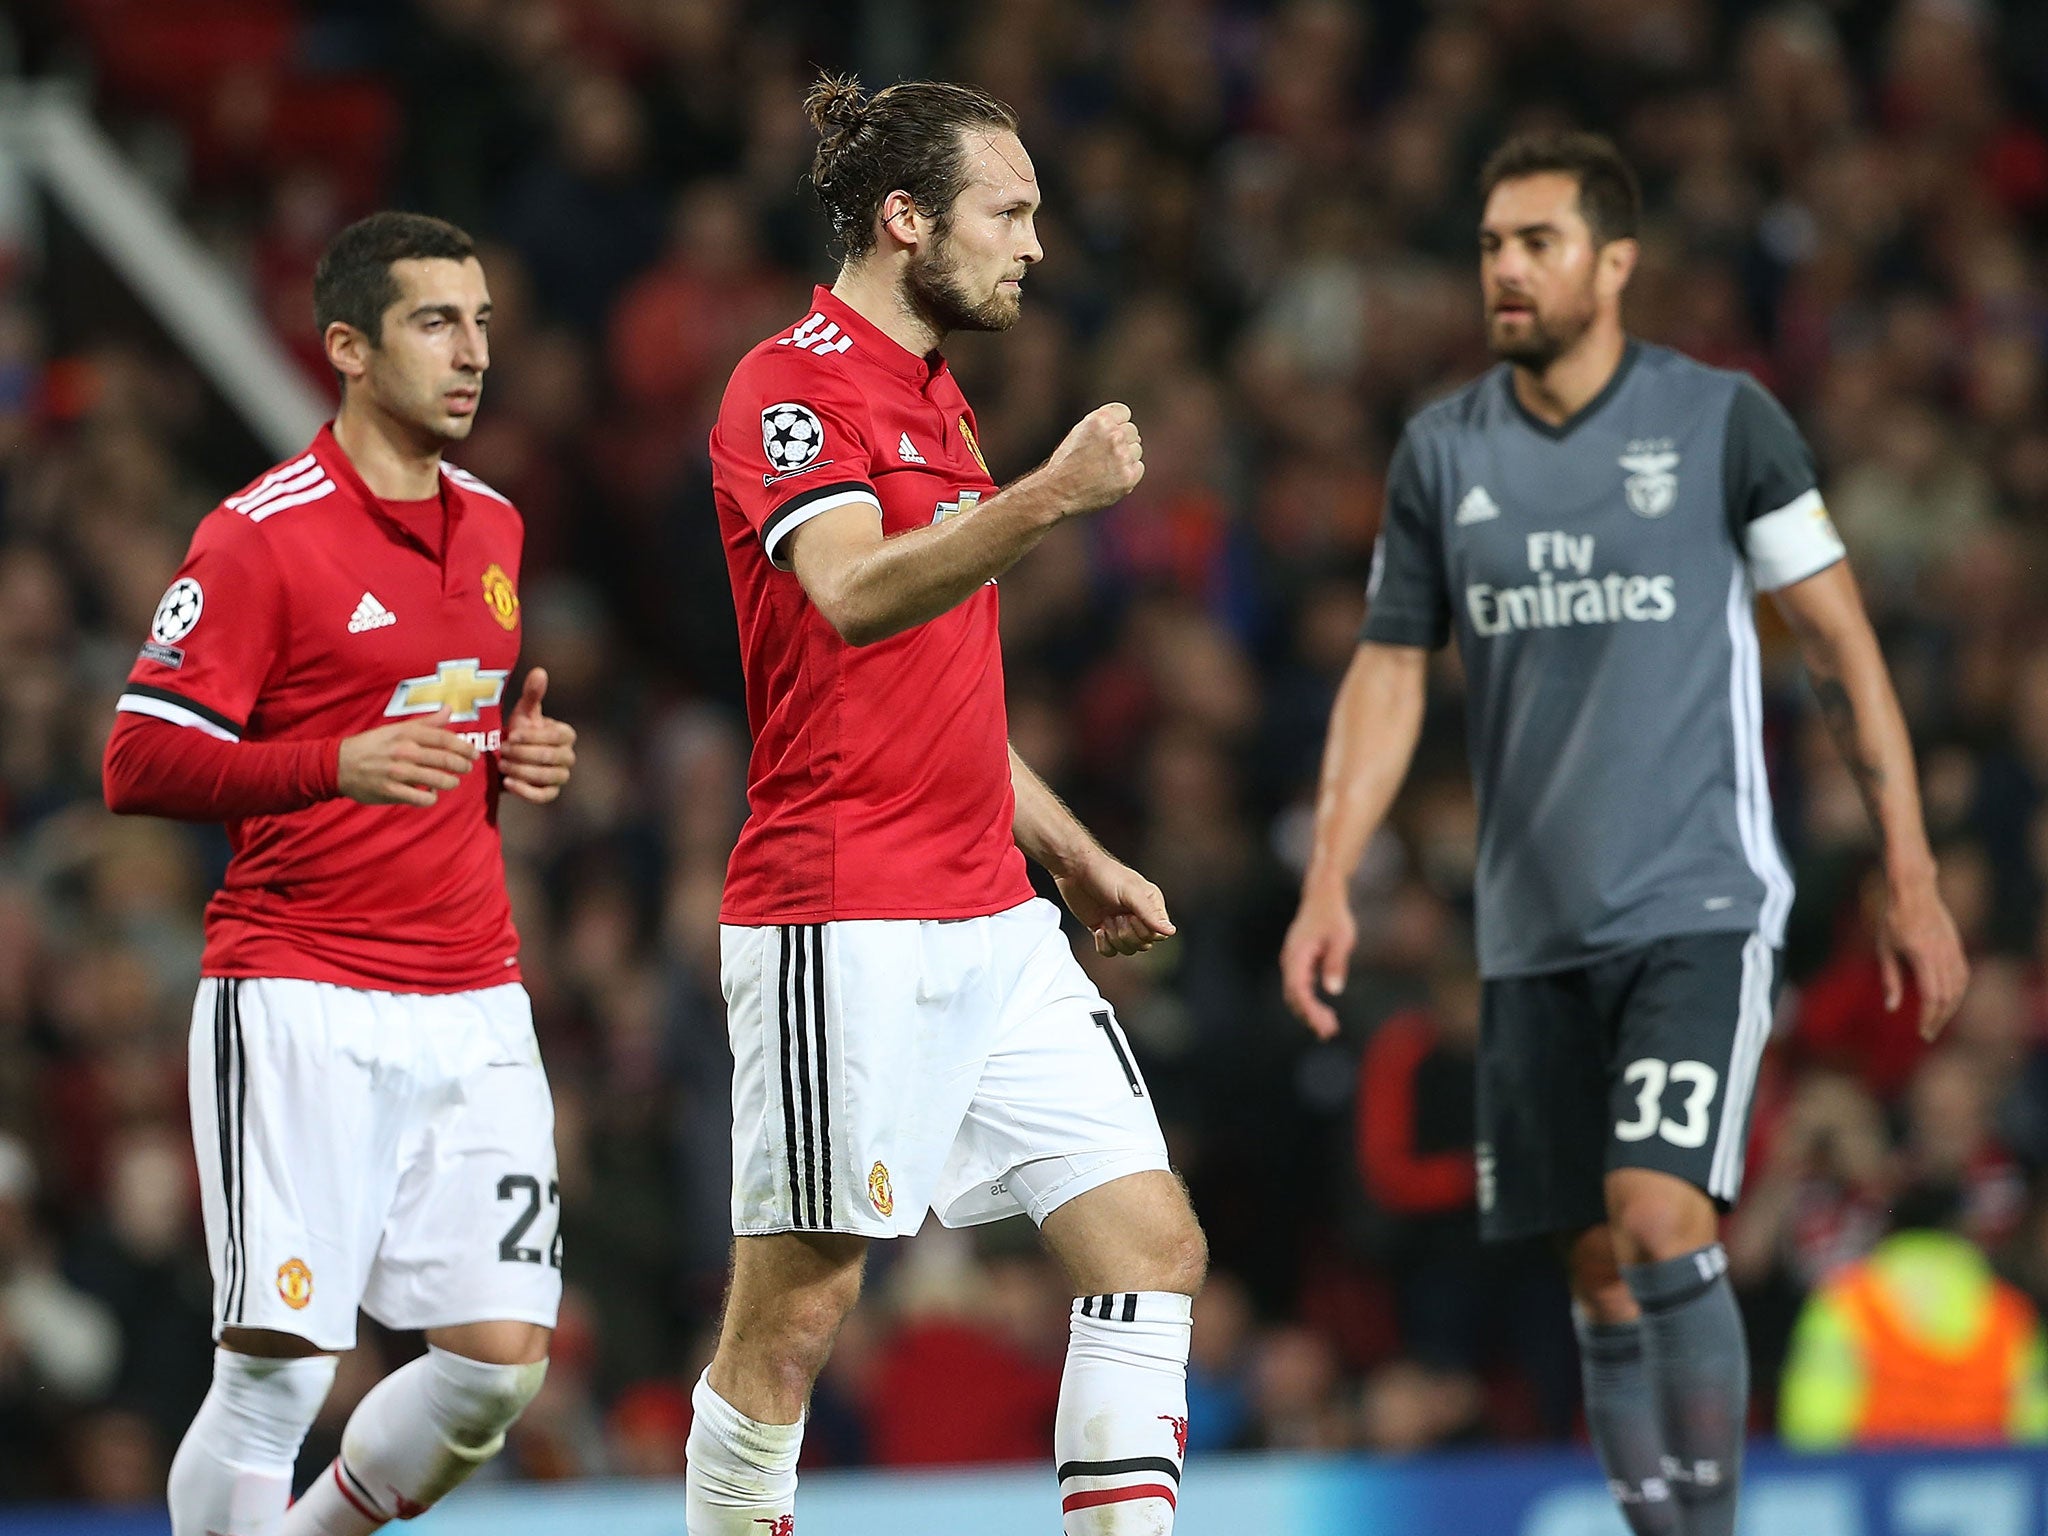 Daley Blind celebrates after converting from the spot to double the hosts' lead